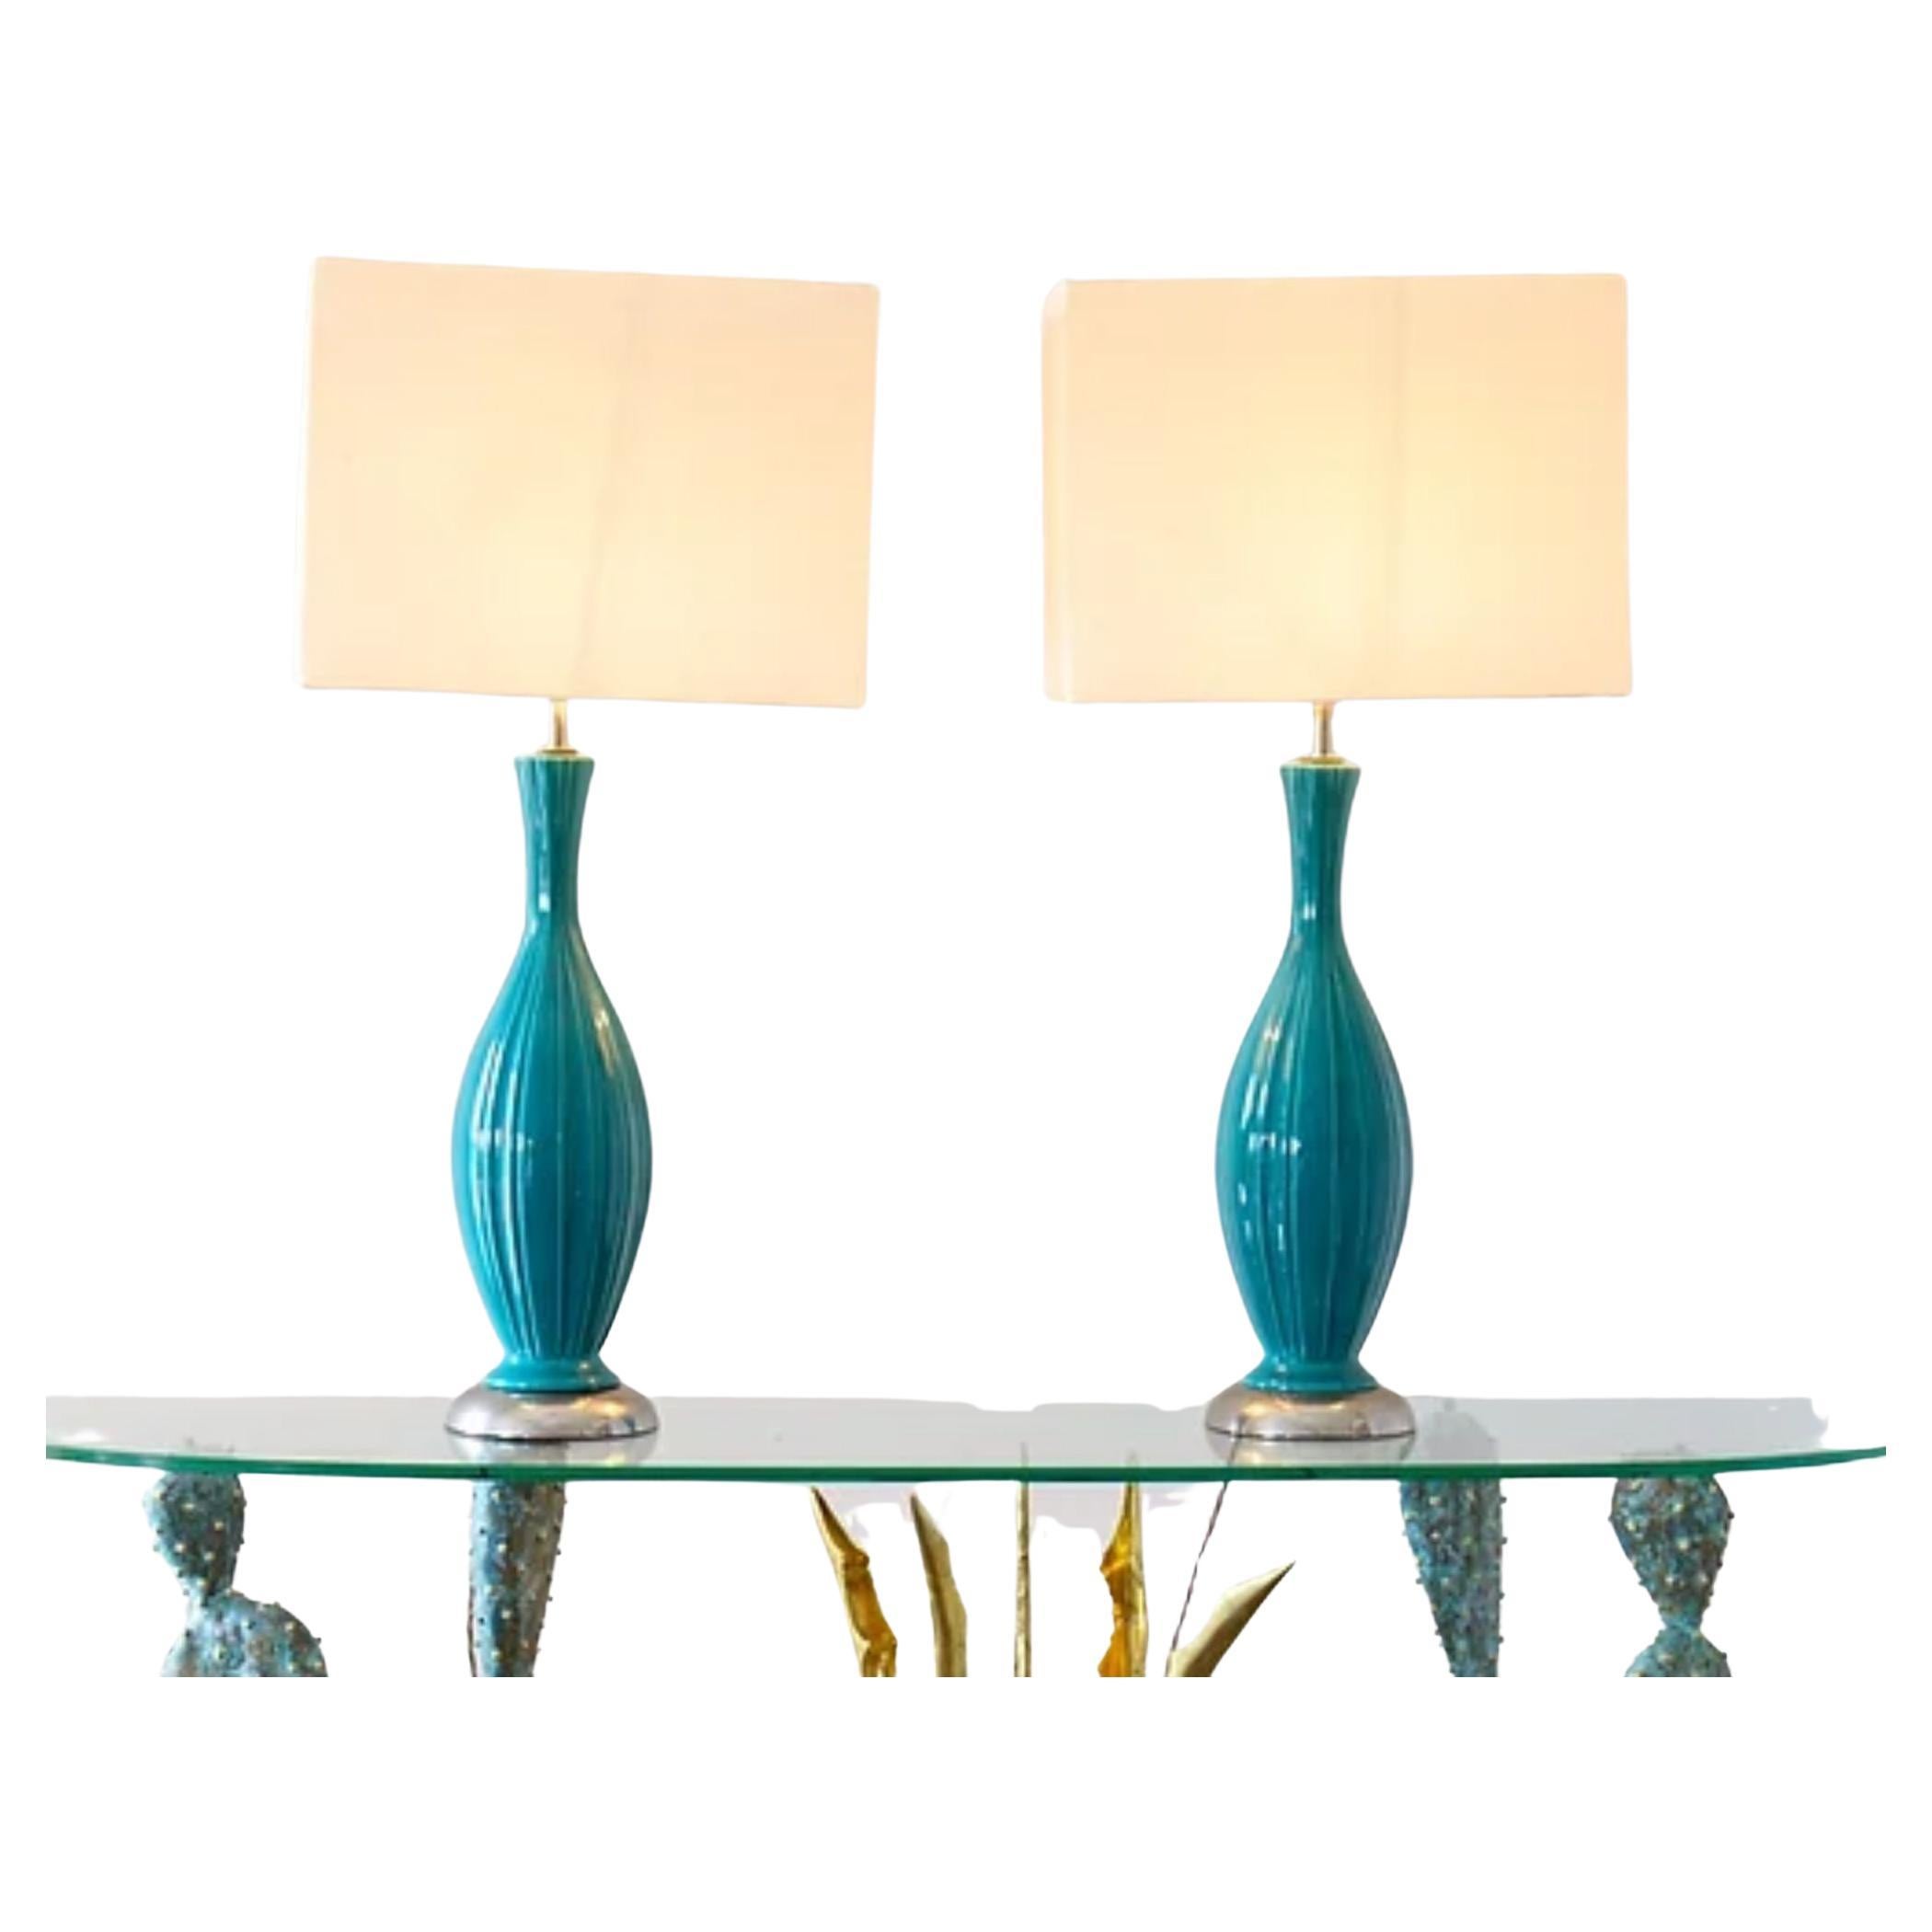 Pair of Turquoise Ribbed Ceramic Lamps, 1960s